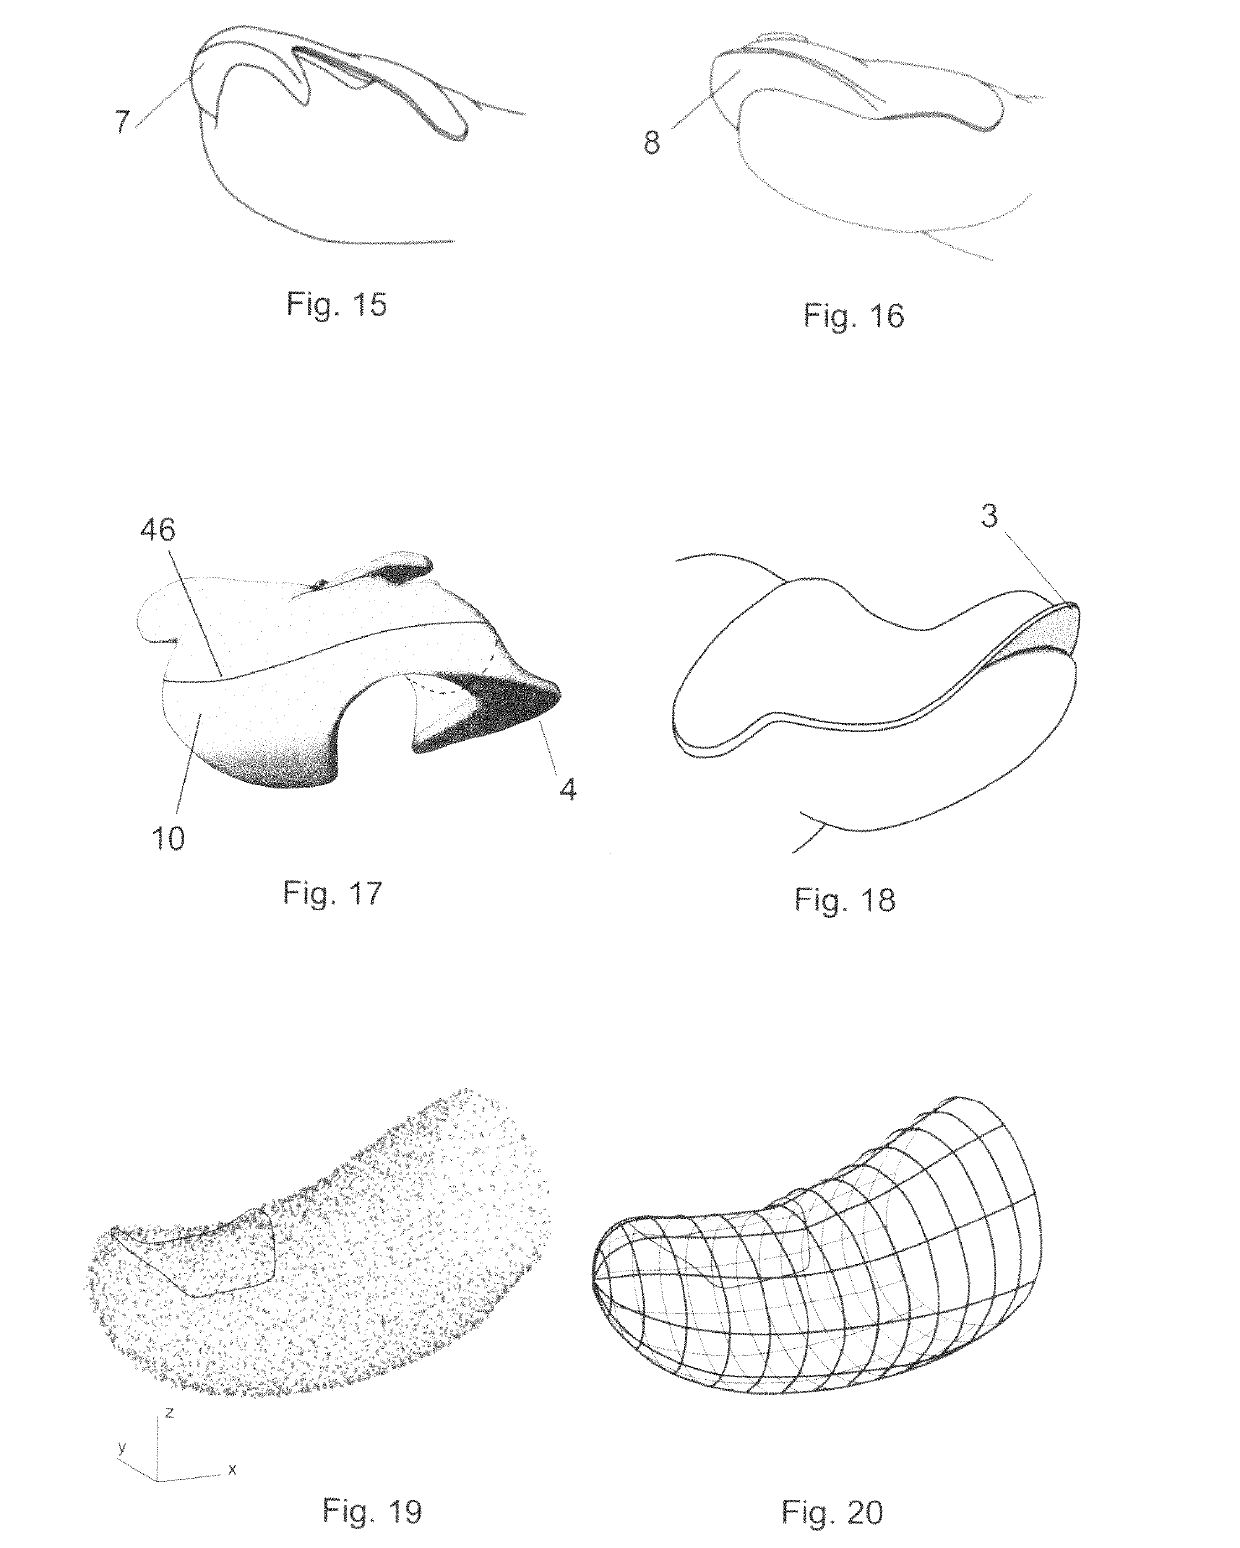 Contoured pick and a method of multiple variations of 3D CAD models